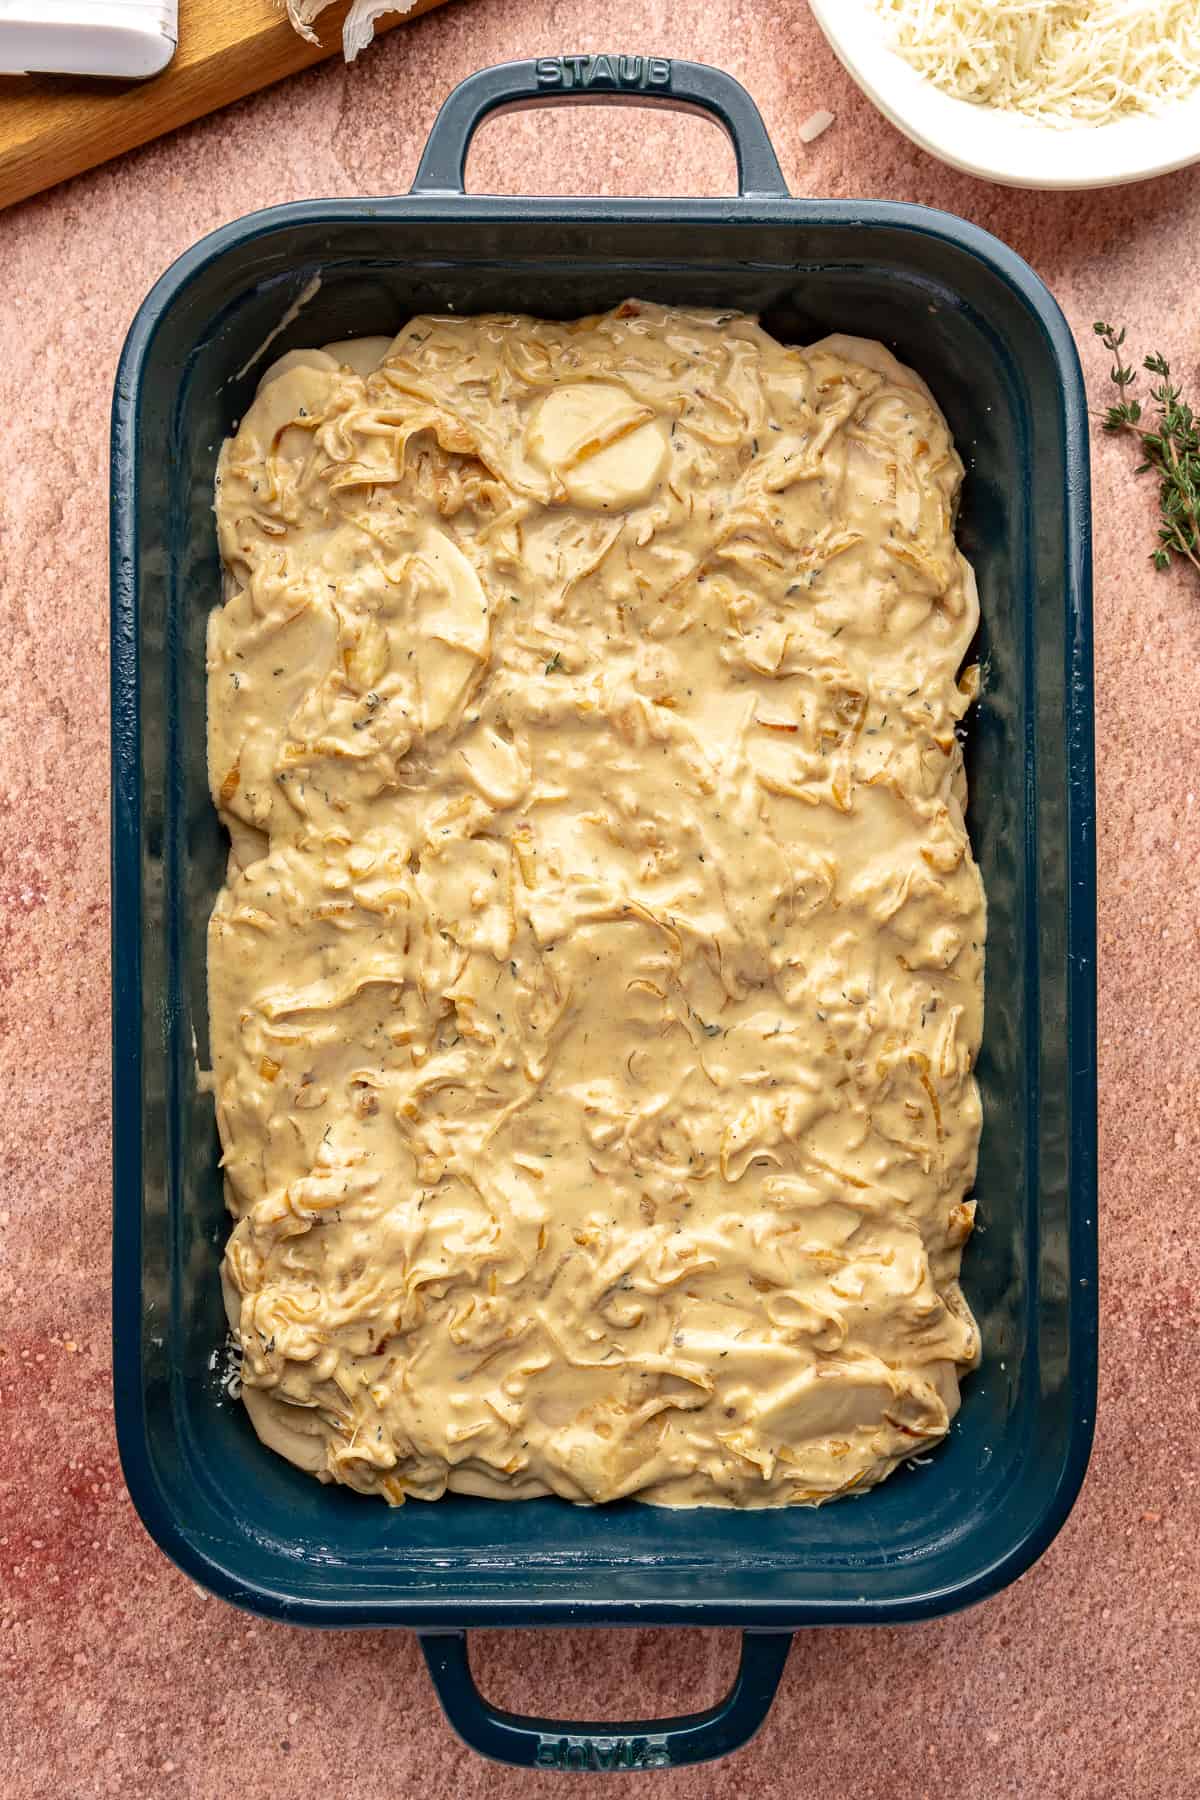 Uncooked Caramelized Onion Scalloped Potatoes in a blue baking dish.